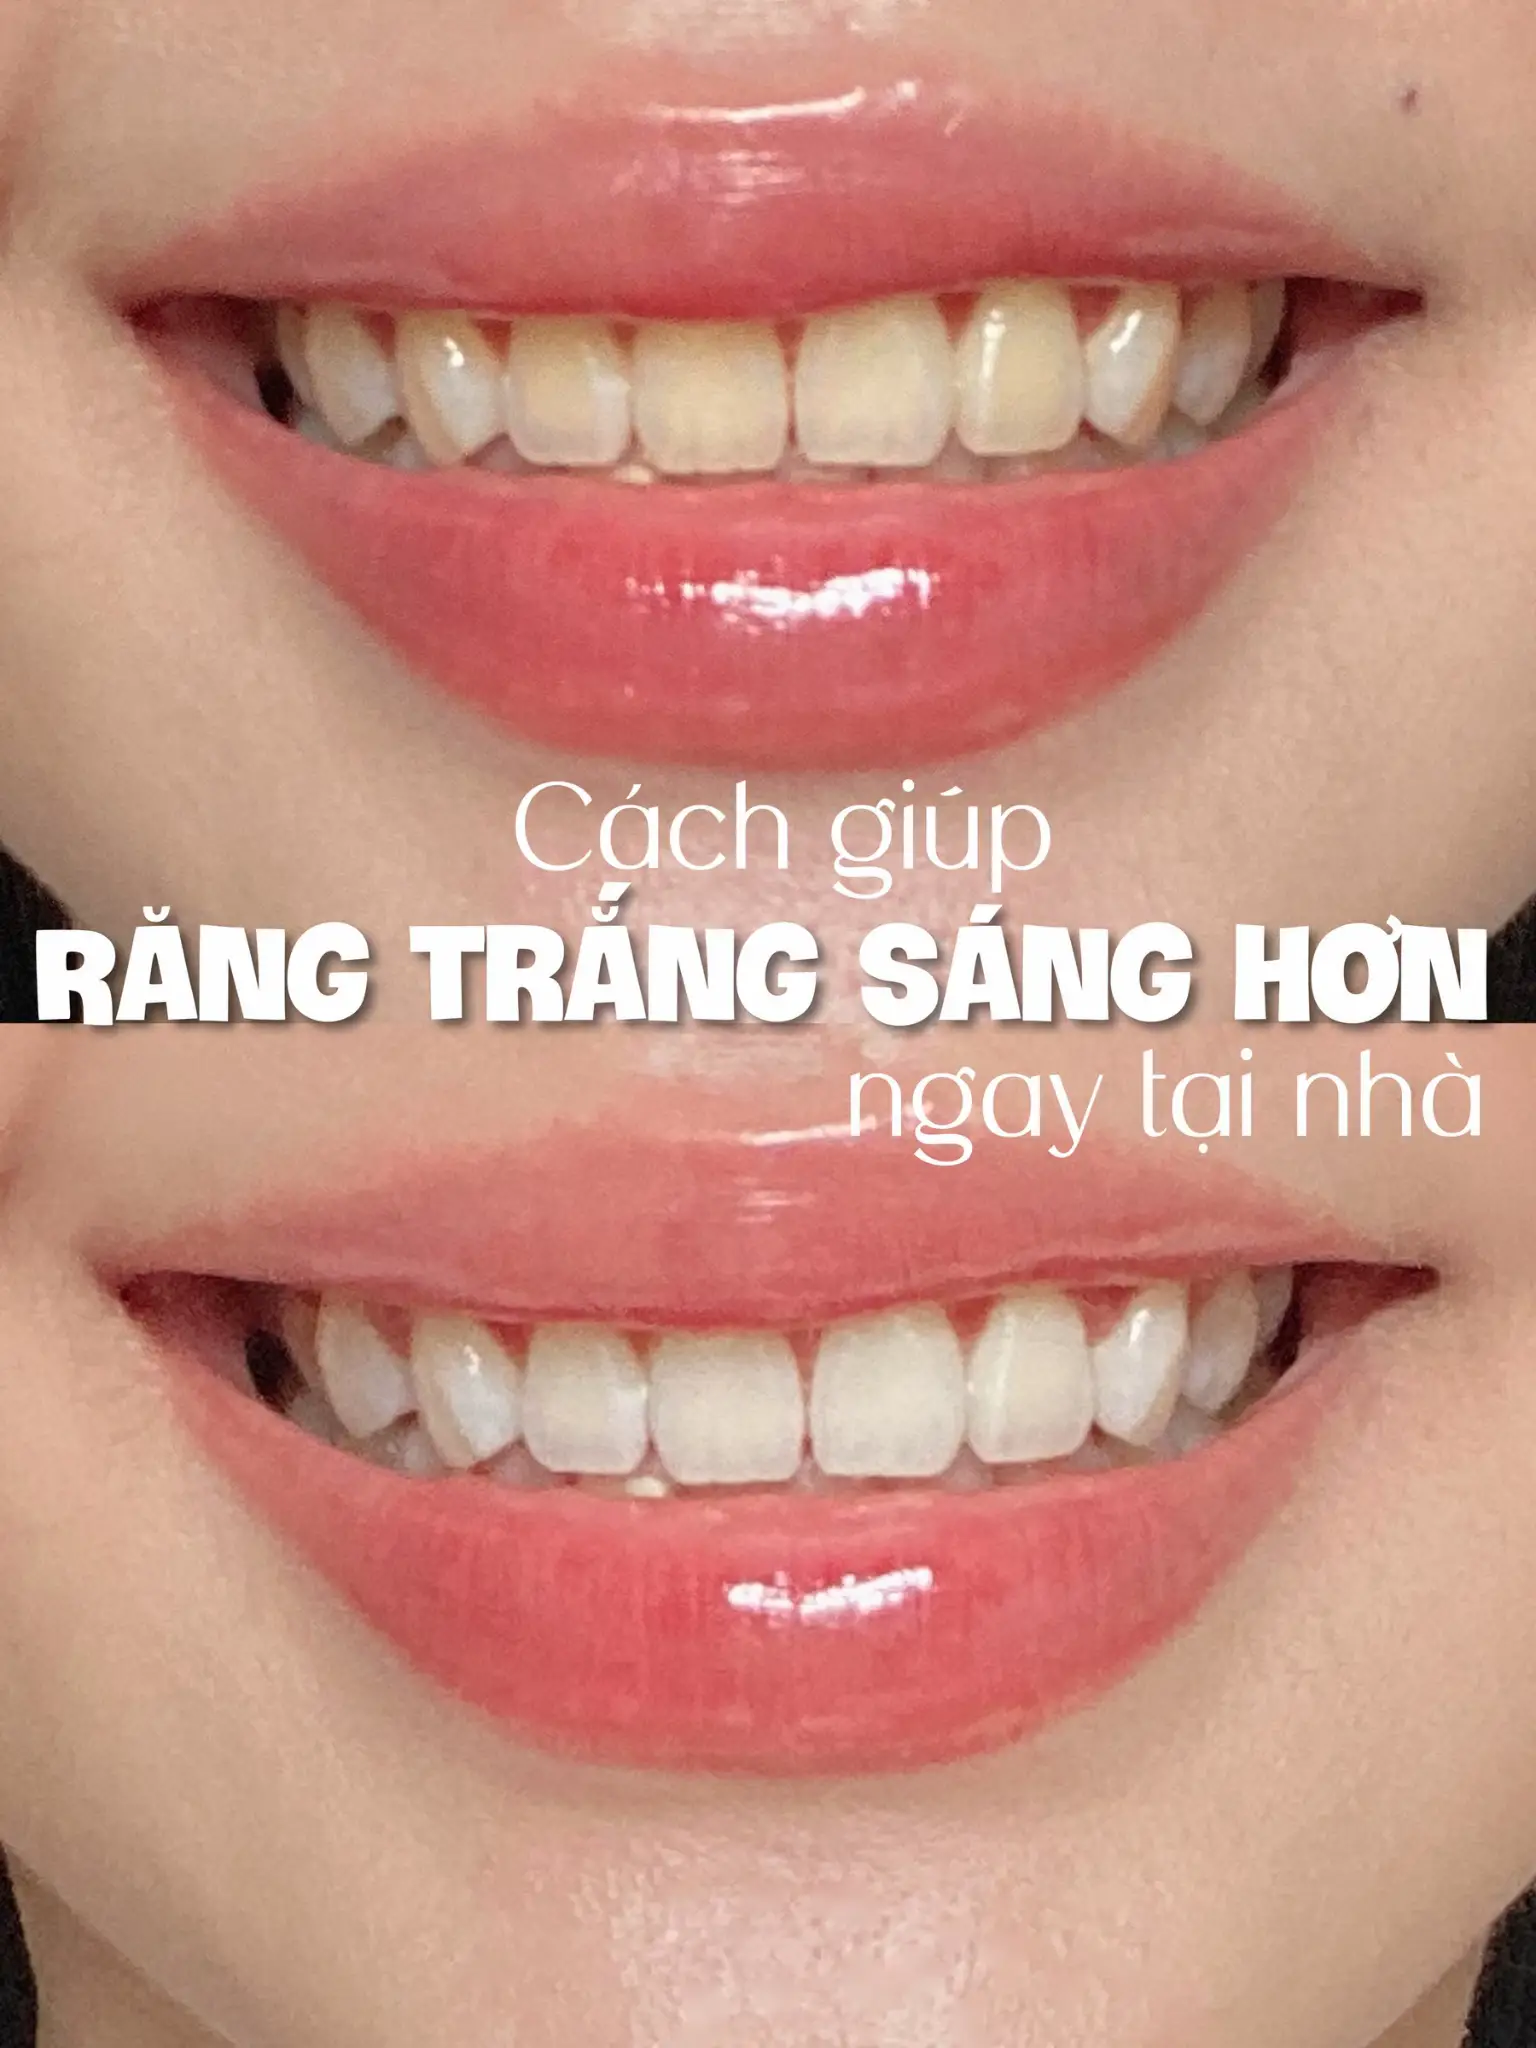  A person's teeth are shown with the words "Cách hùn RĂNG TRẮNG SÁNG HƠN" written above them.